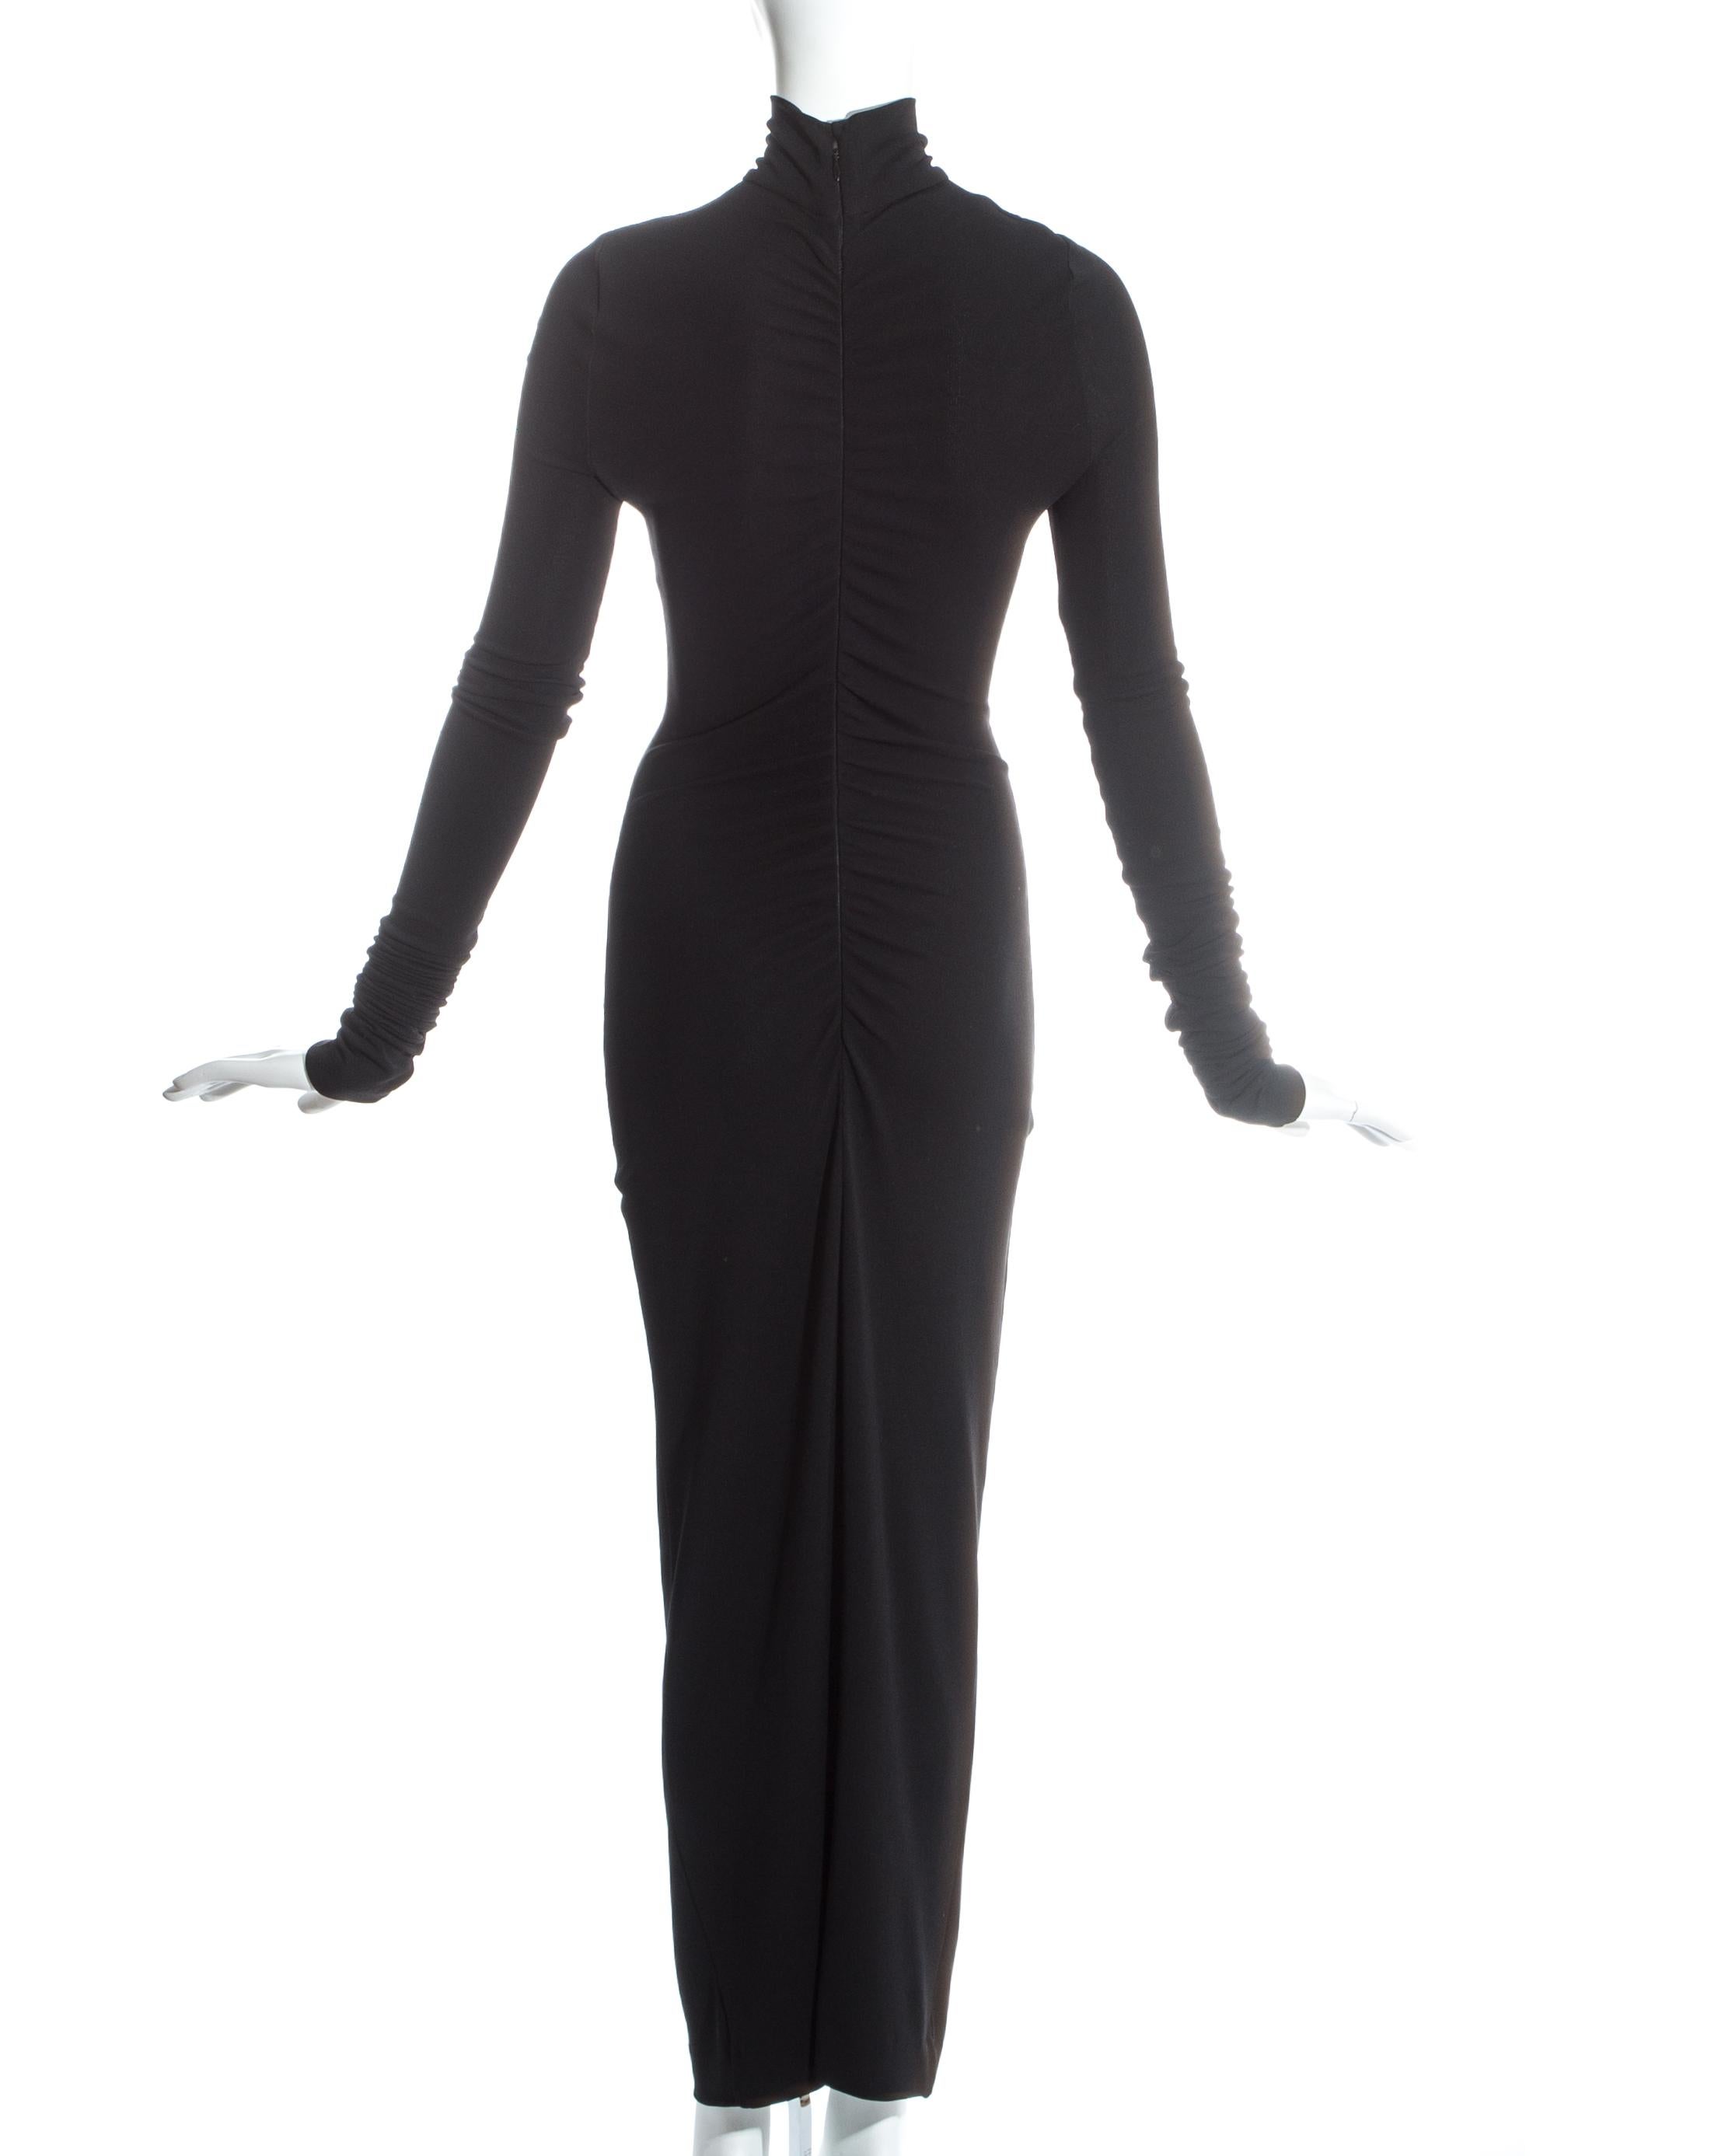 Women's Dolce & Gabbana black spandex figure hugging maxi dress with cut out, c. 1990s For Sale